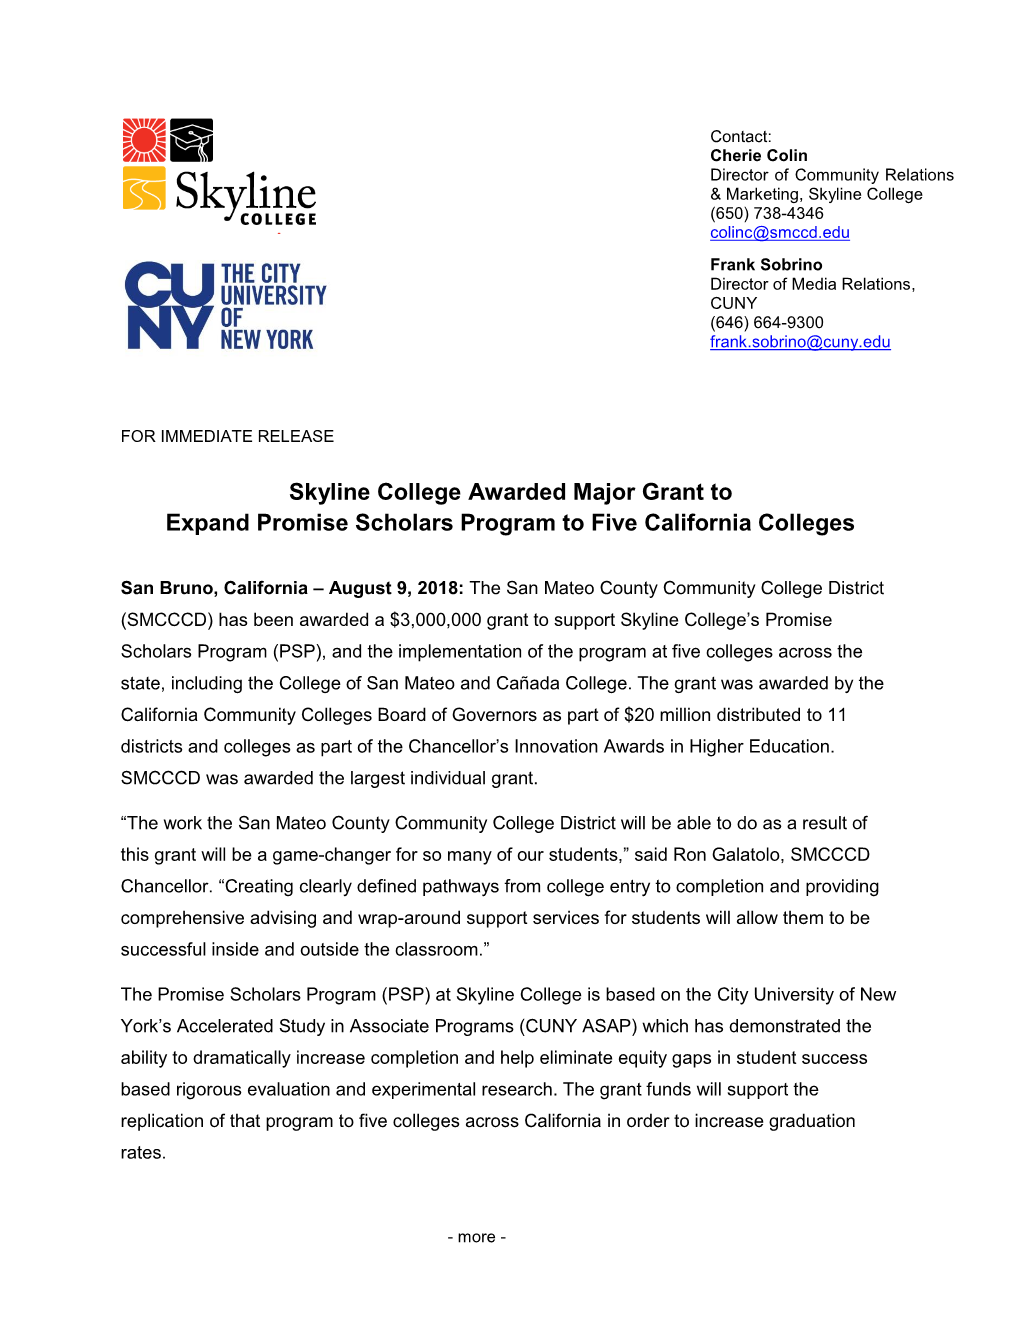 Skyline College Awarded Major Grant to Expand Promise Scholars Program to Five California Colleges